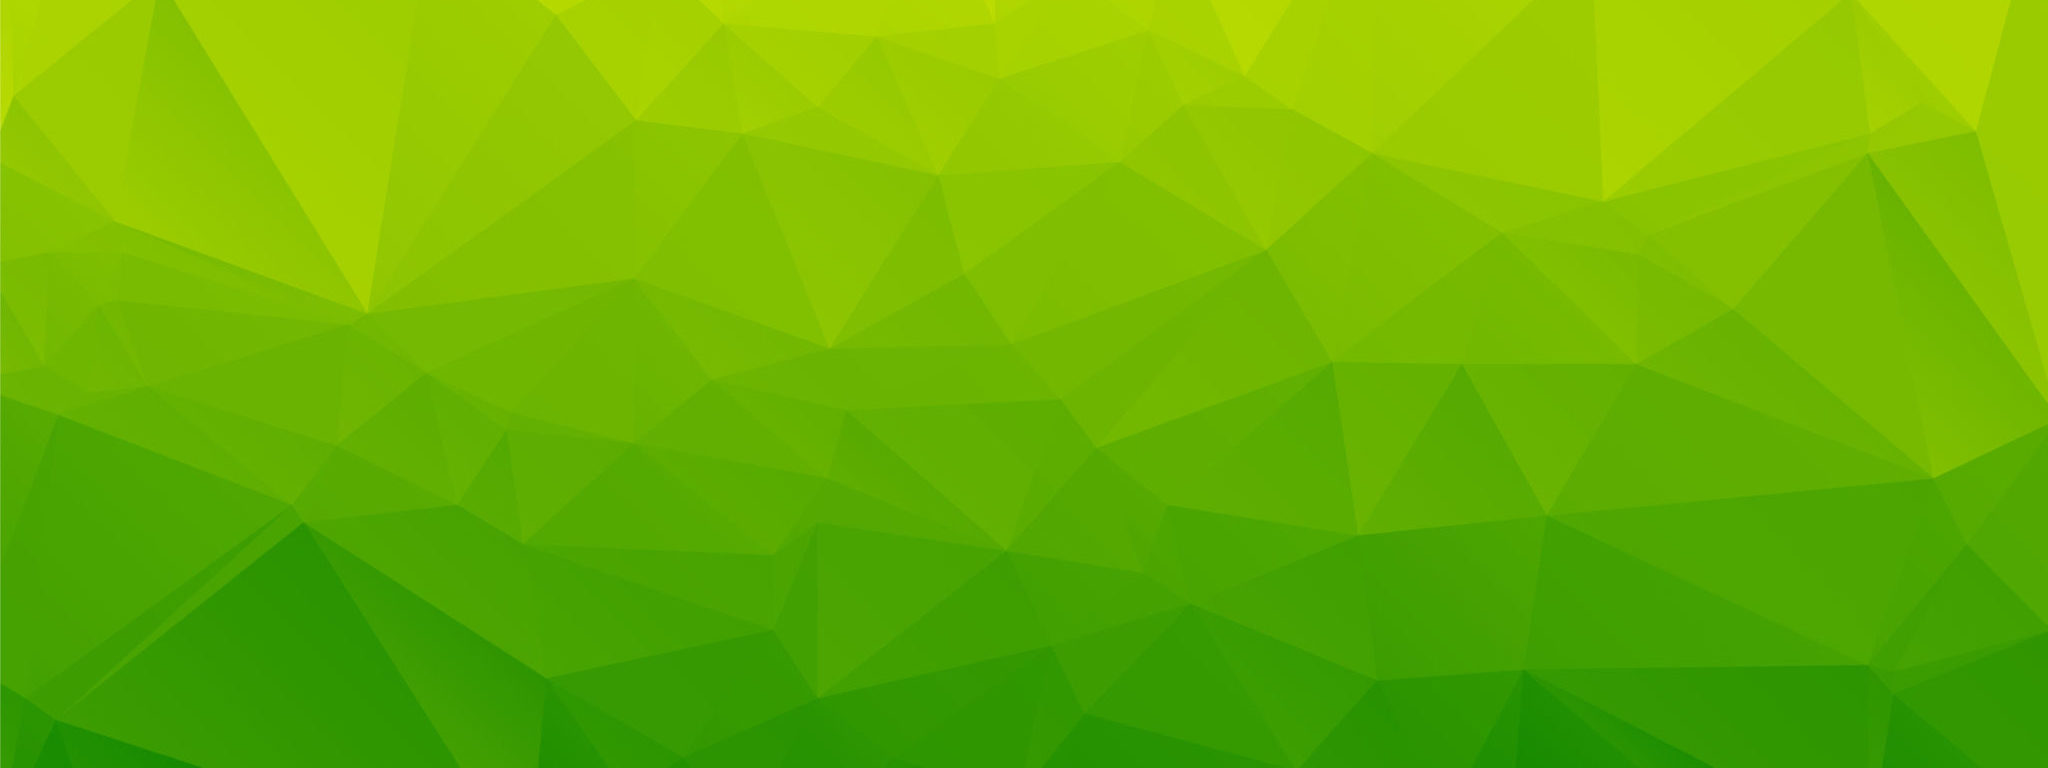 Shades Of Green Abstract Polygonal Geometric Background Low Poly Loudoun Chamber